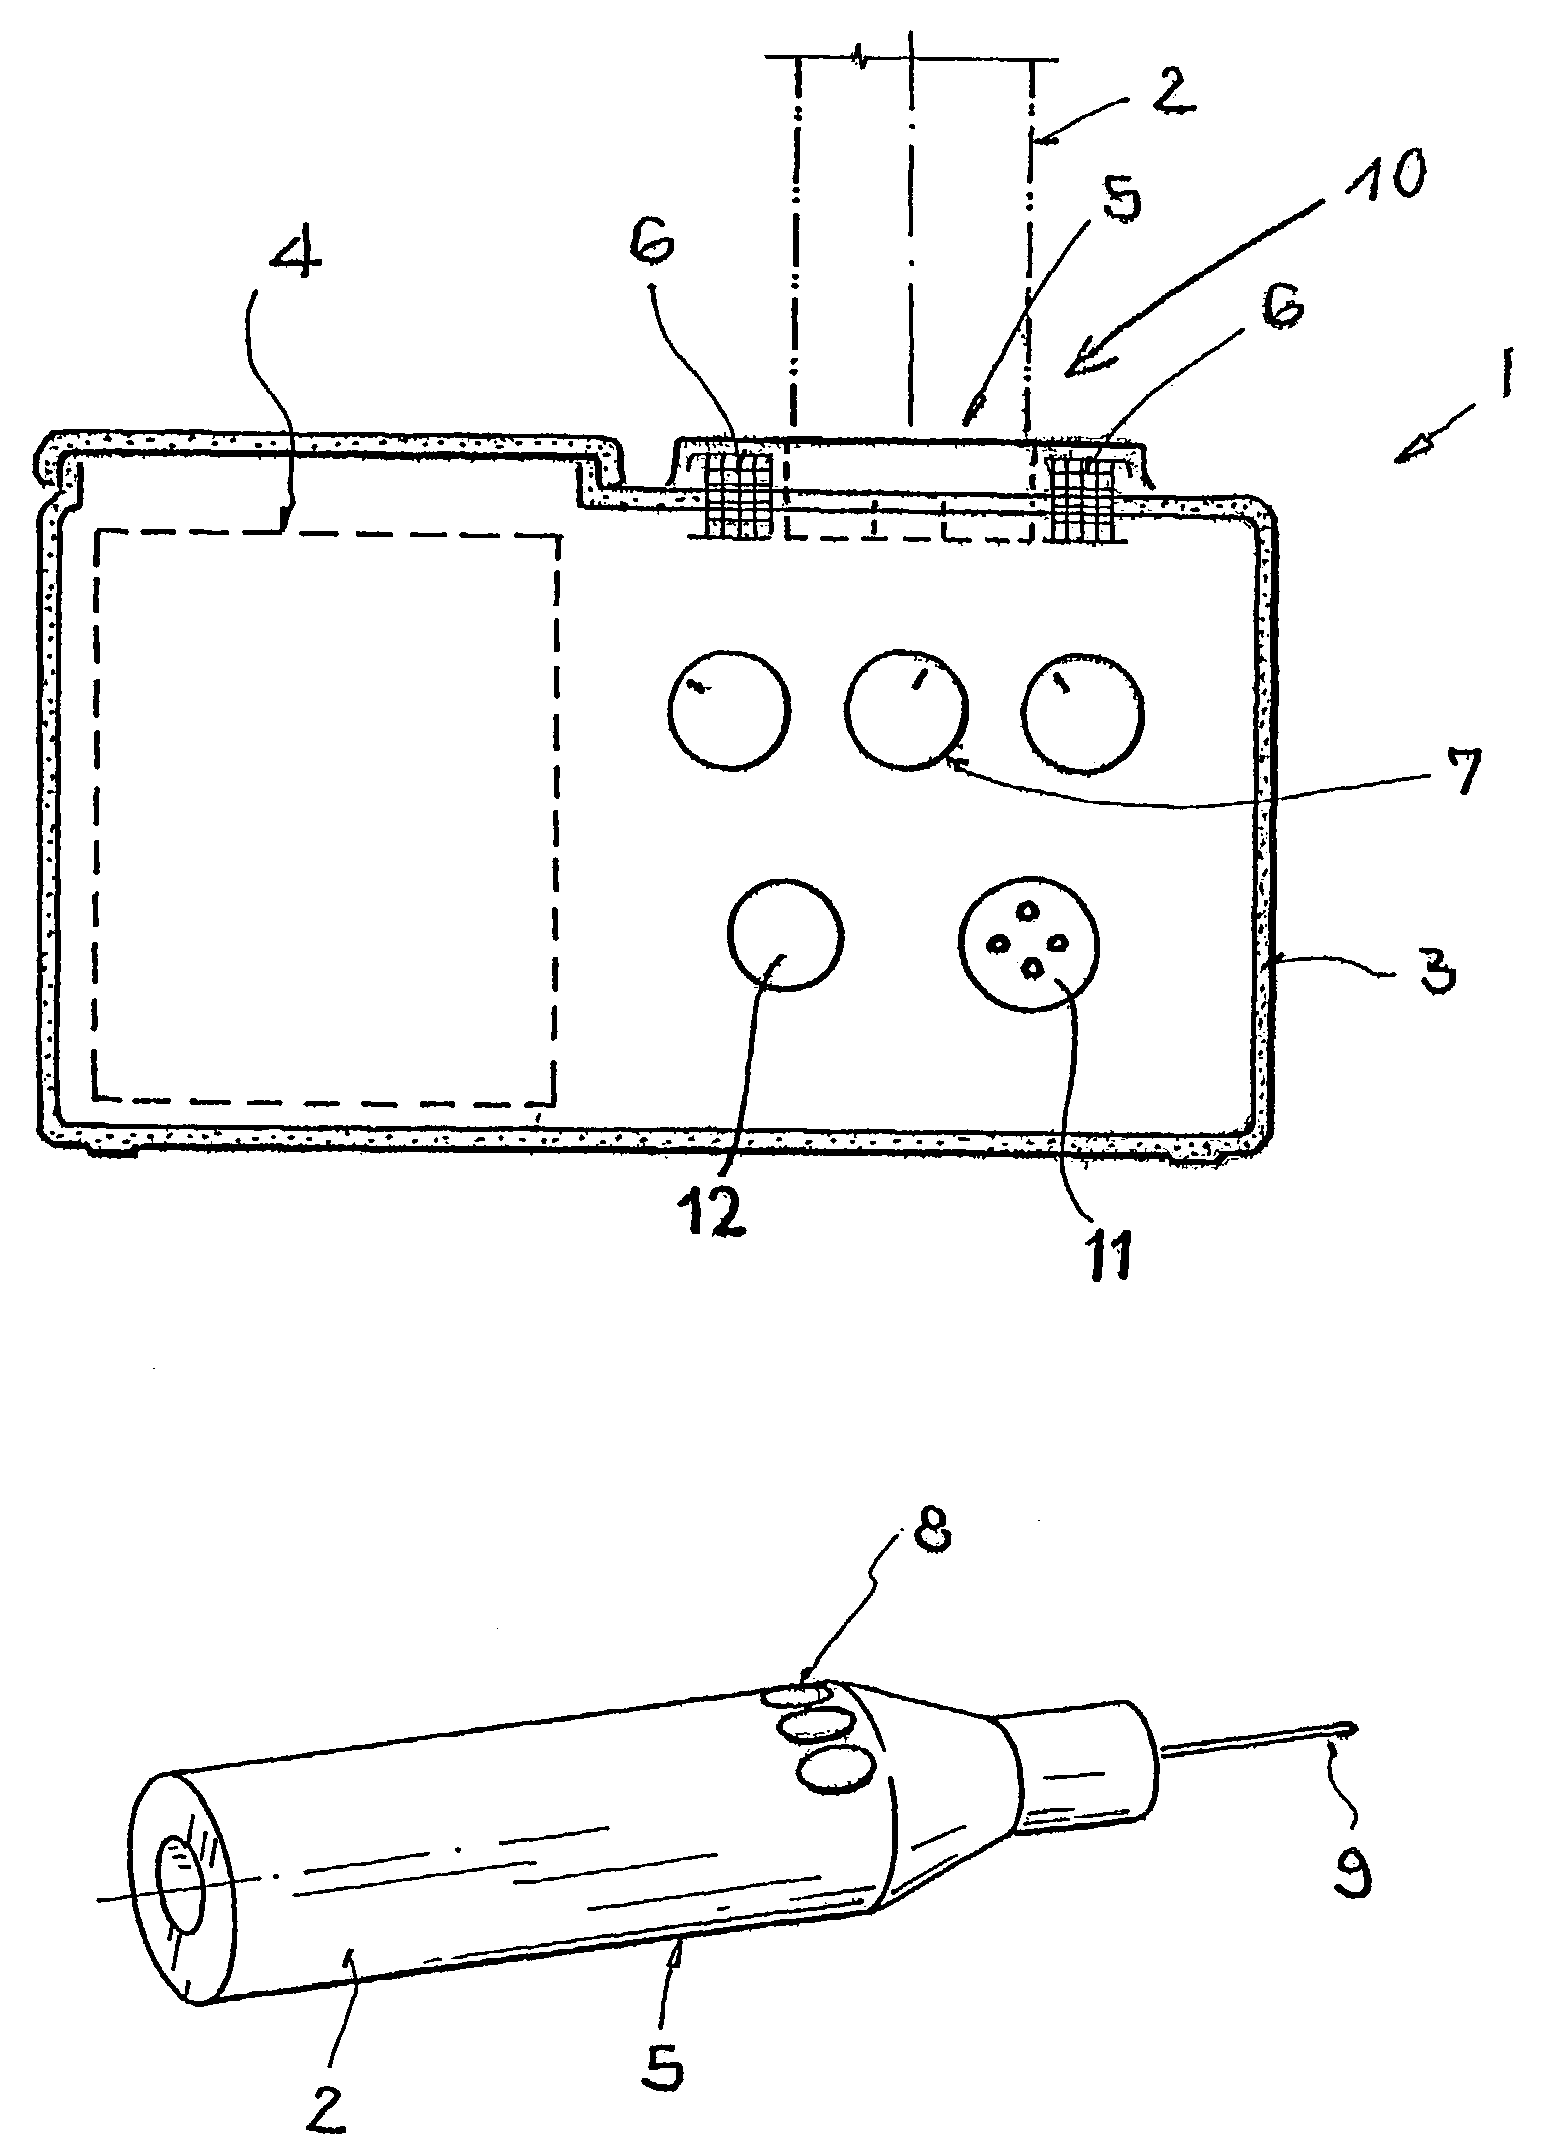 Device for supplying an electro-pen with electrical energy